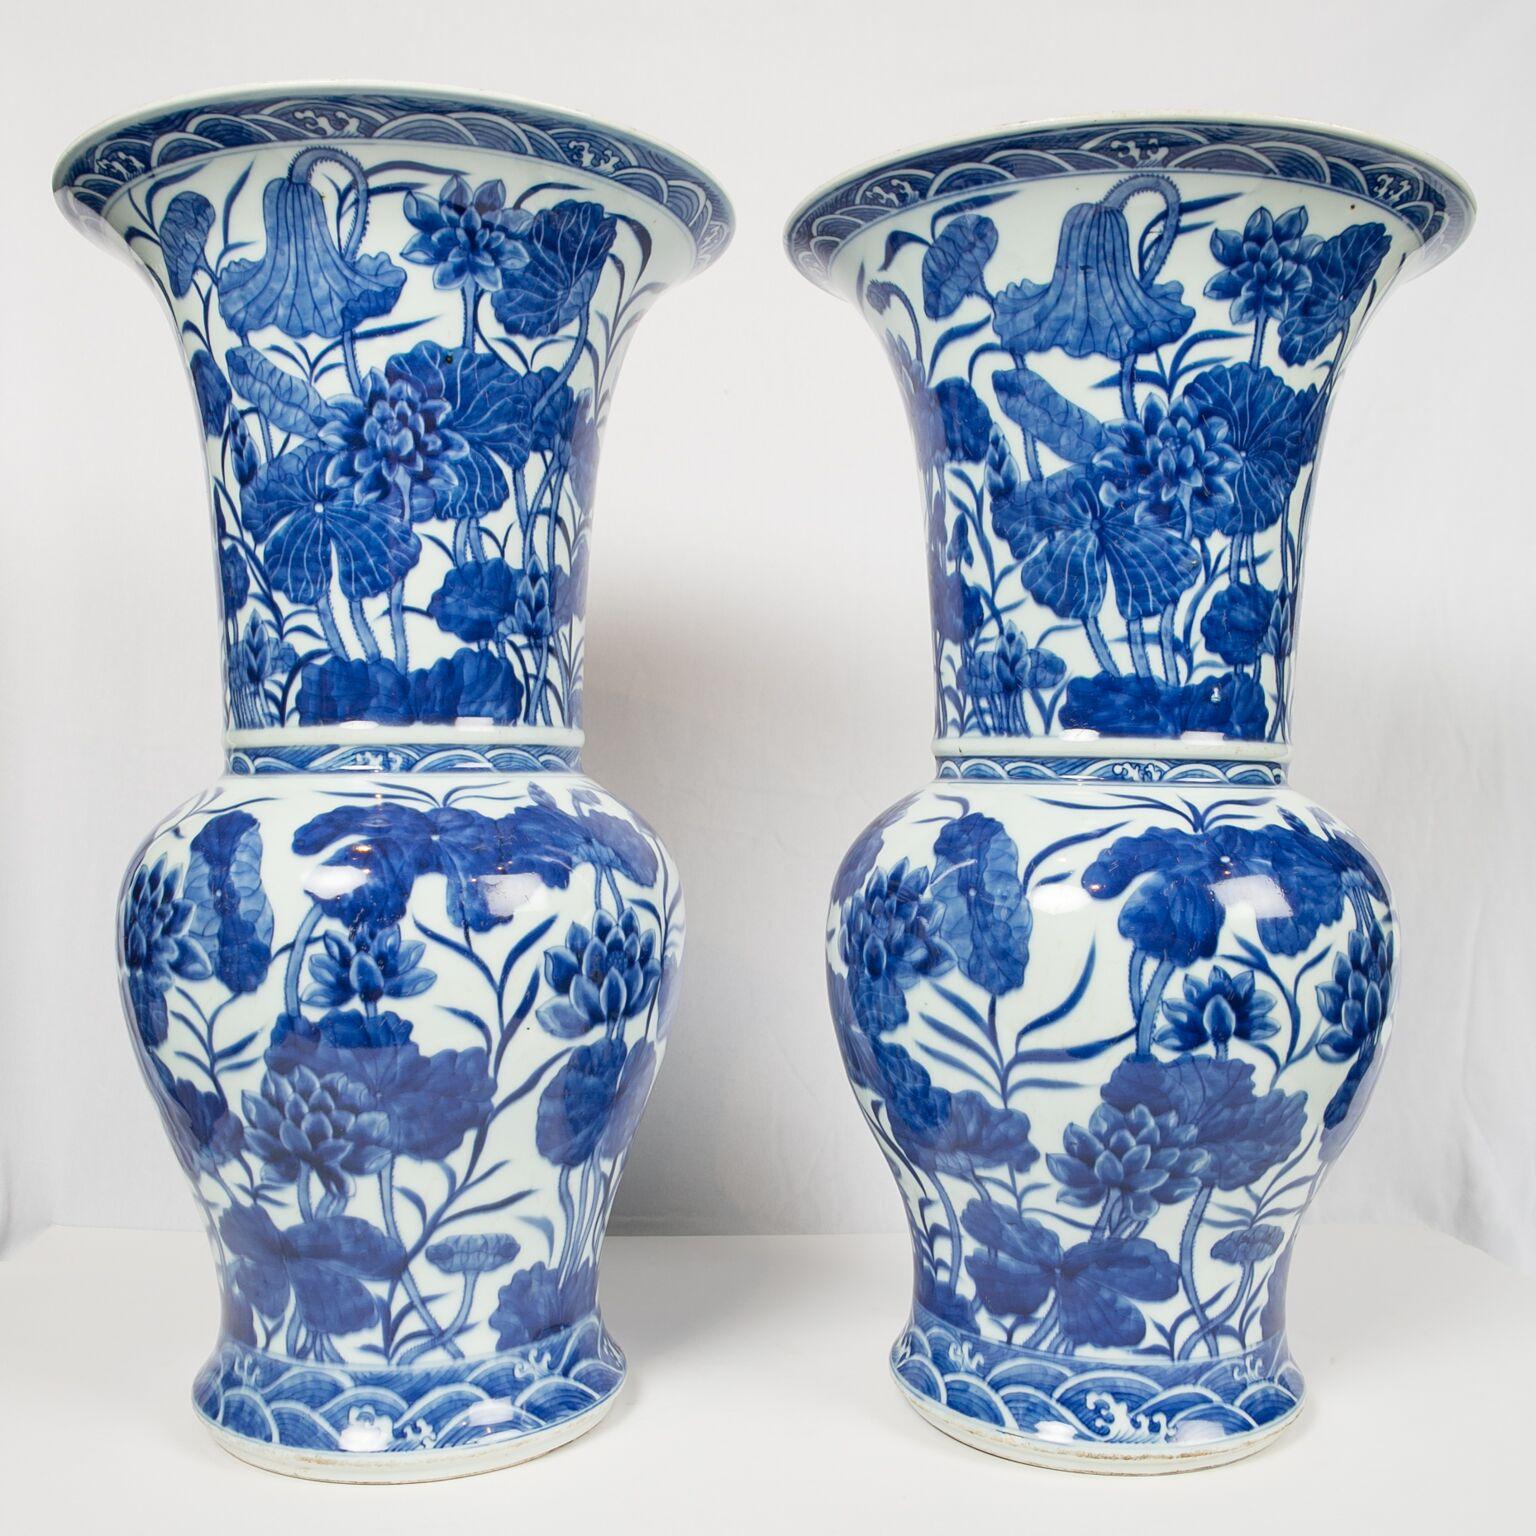 Pair of Antique Chinese Blue and White Porcelain Vases Qing Dynasty 19th Century 5